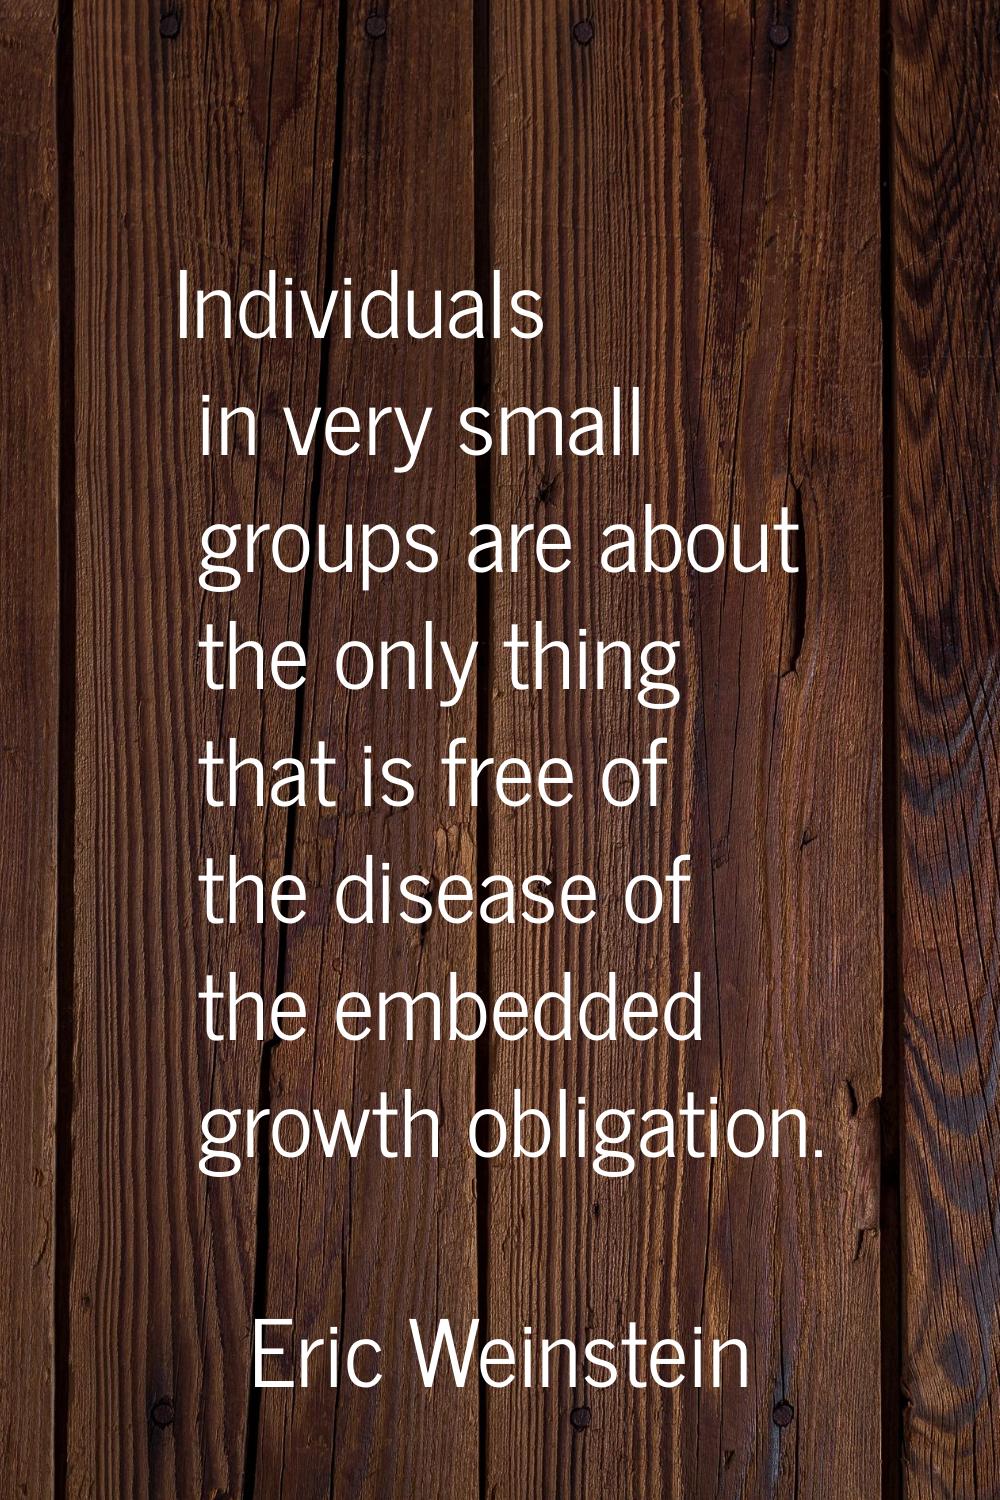 Individuals in very small groups are about the only thing that is free of the disease of the embedd